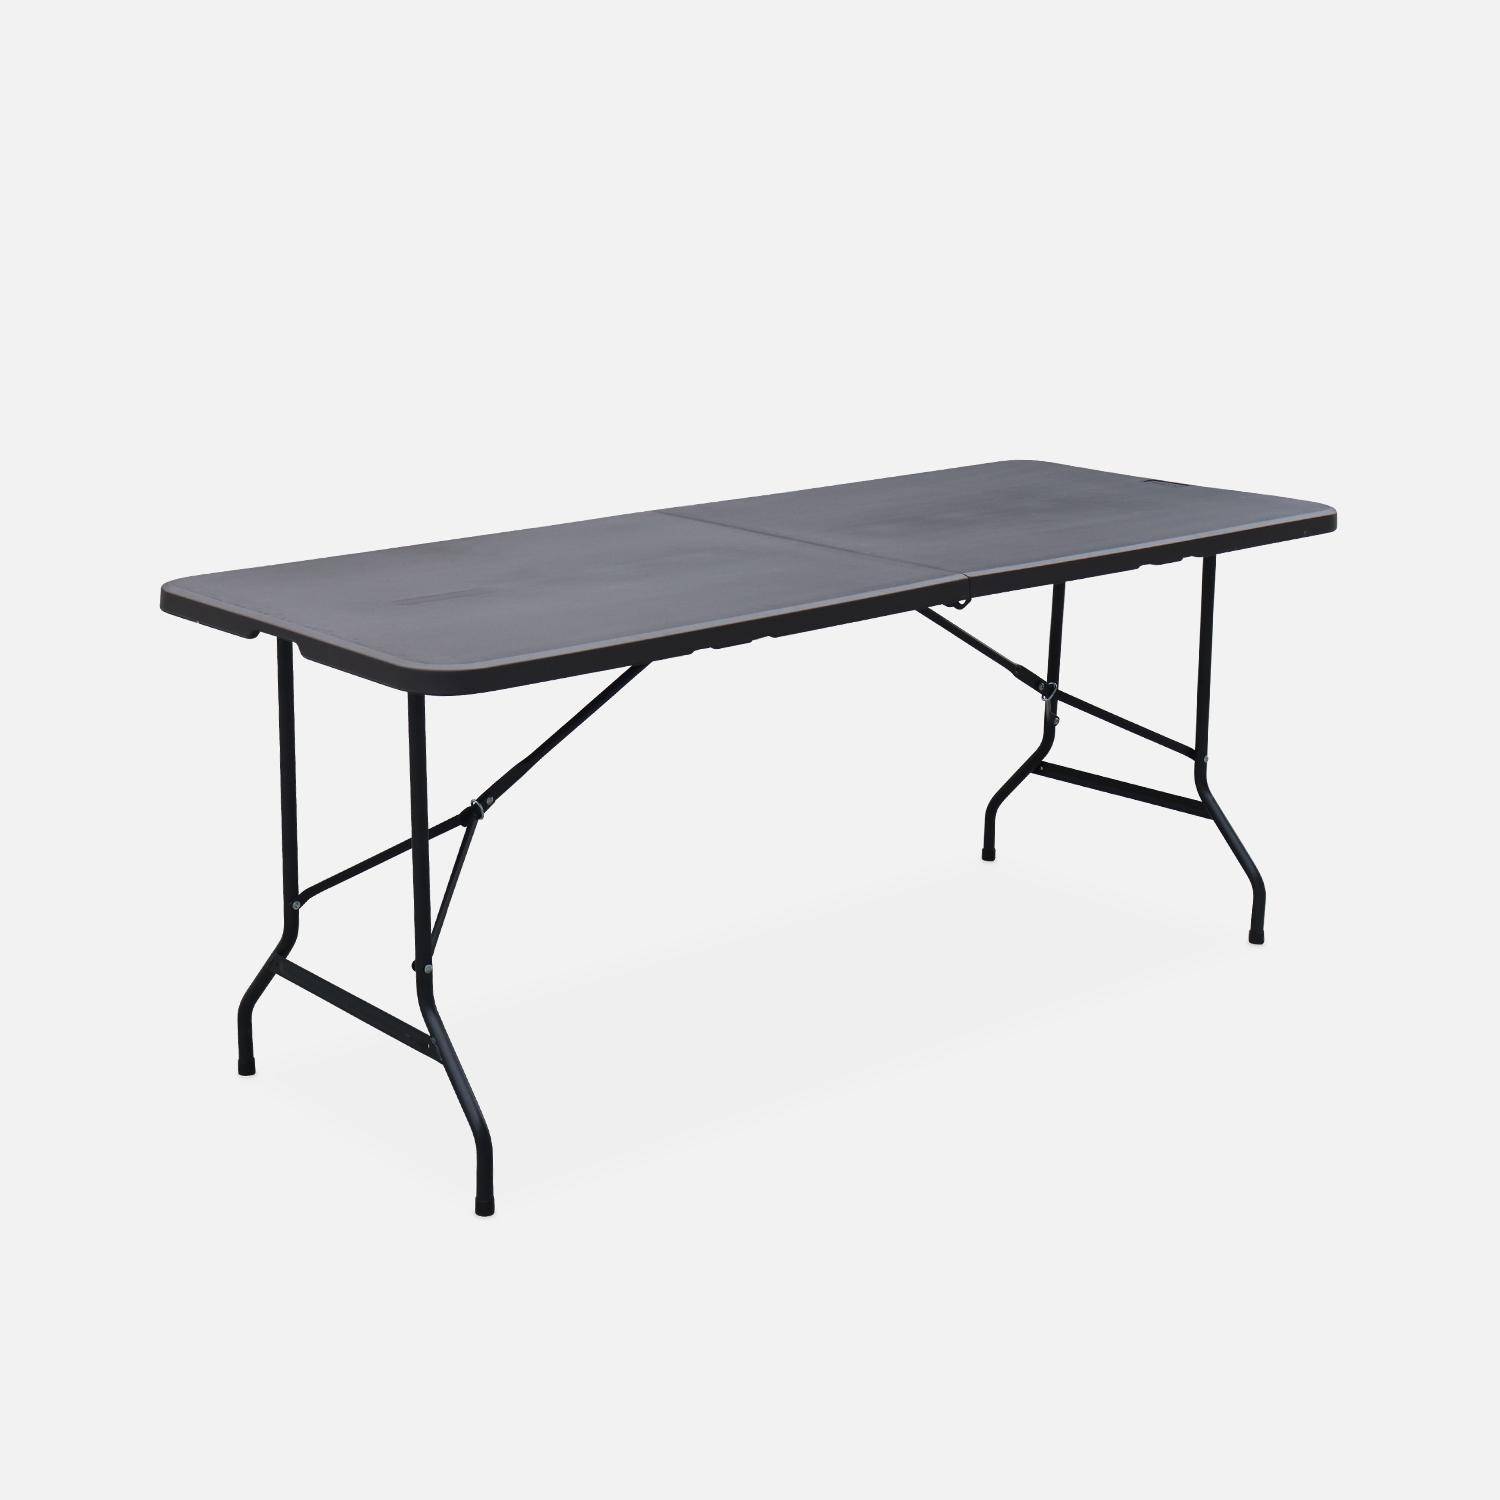 Set of 2 folding plastic reception tables with 12 chairs, Fiesta, Charcoal Grey,sweeek,Photo2